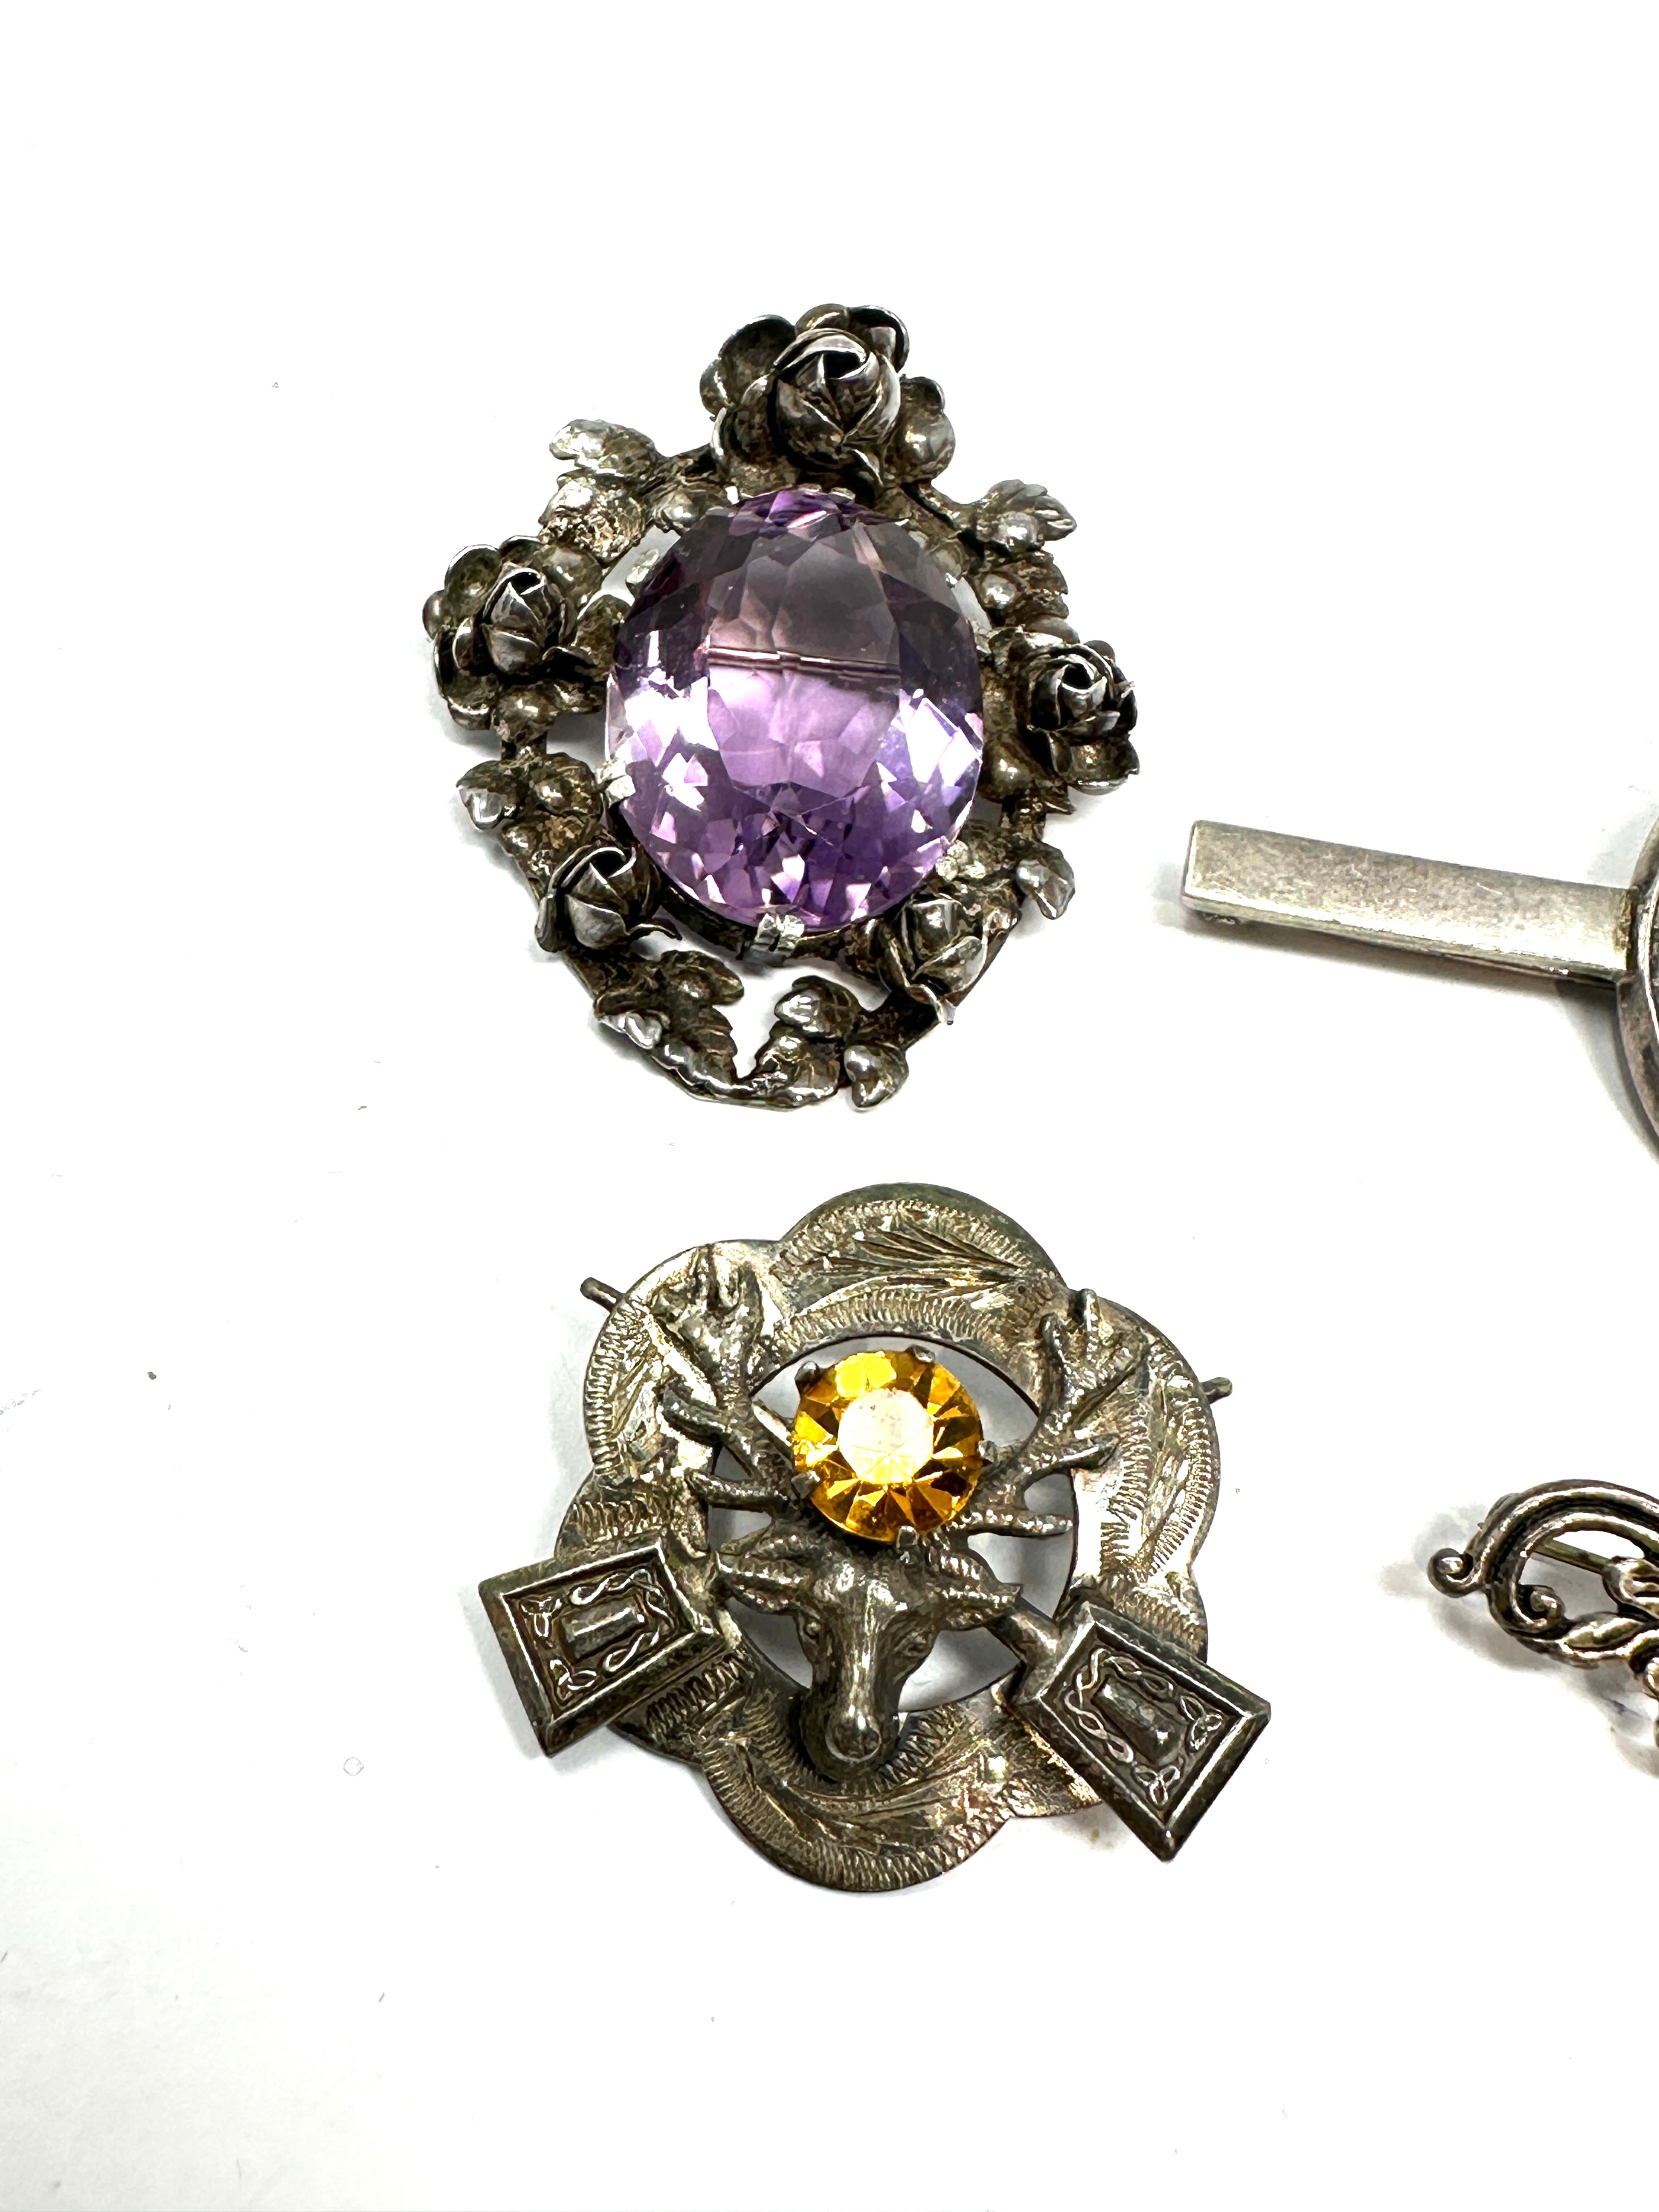 6 vintage silver brooches weight 50g - Image 3 of 4